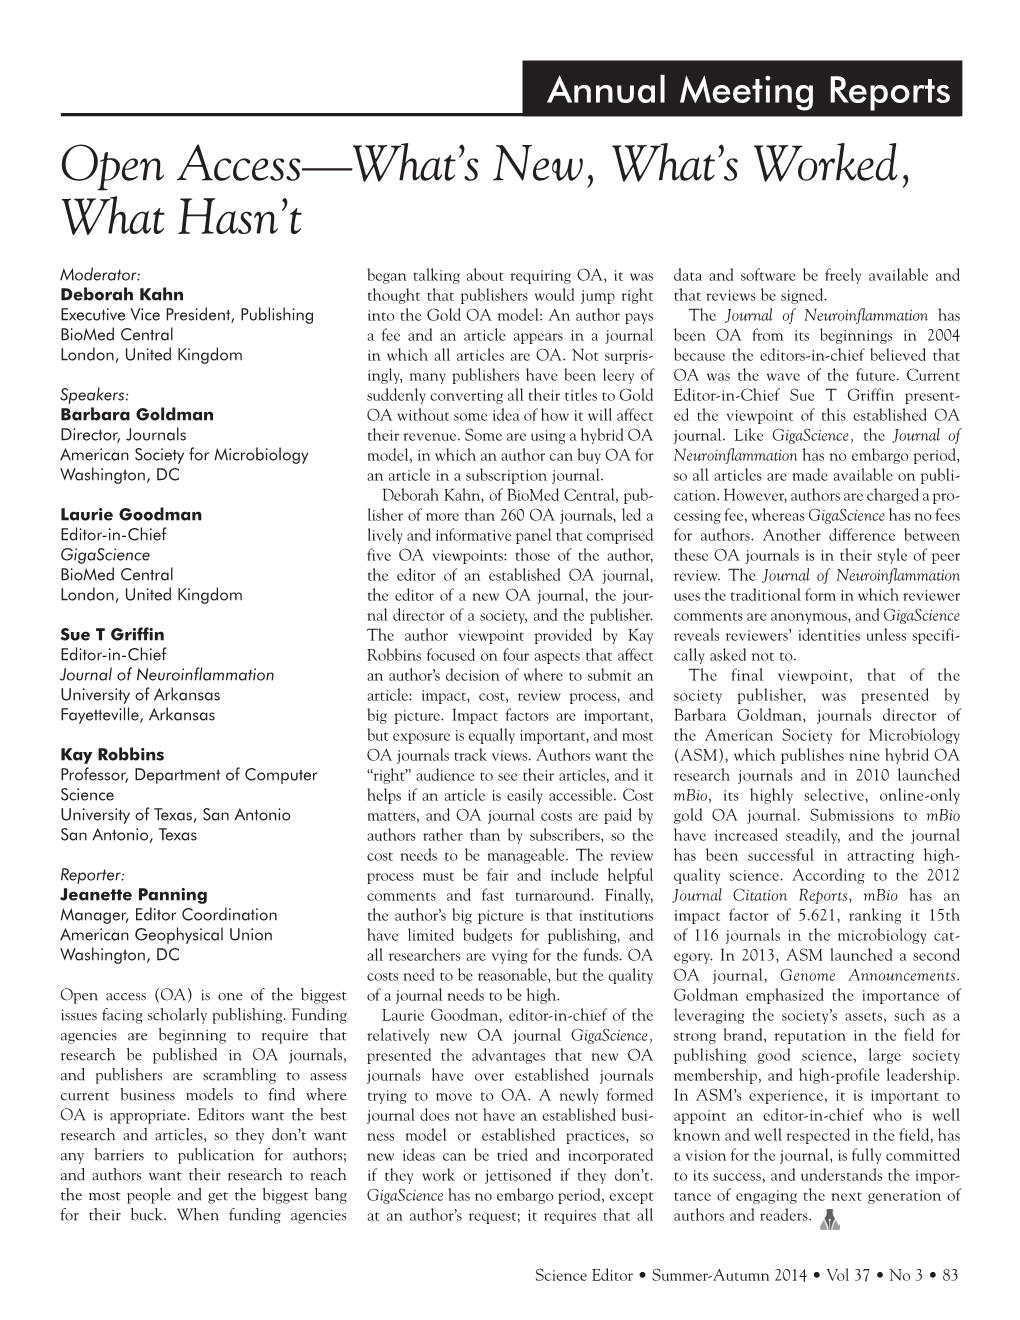 Open Access—What's New, What's Worked, What Hasn't